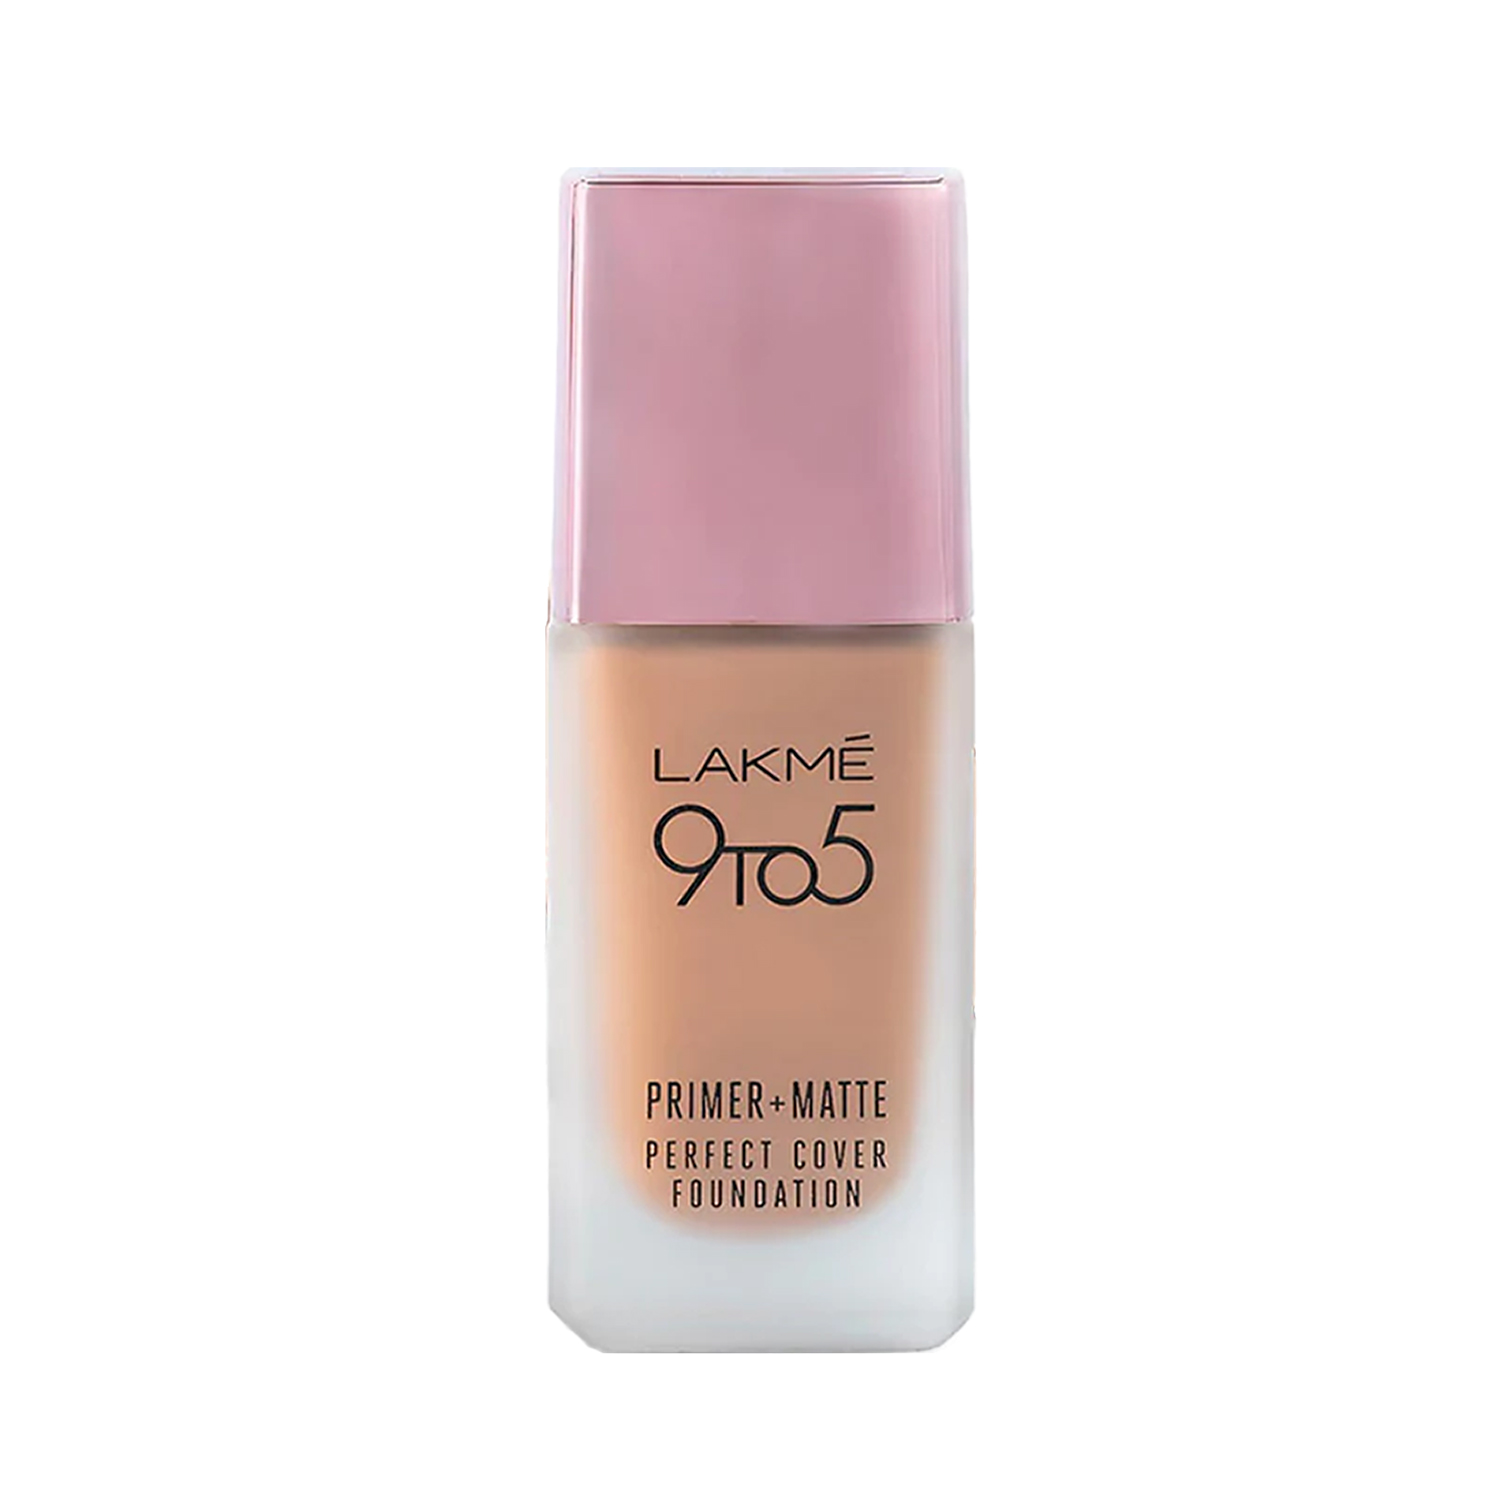 Lakme 9To5 Primer + Matte Perfect Cover Foundation, 25ml-C140 Cool Rose